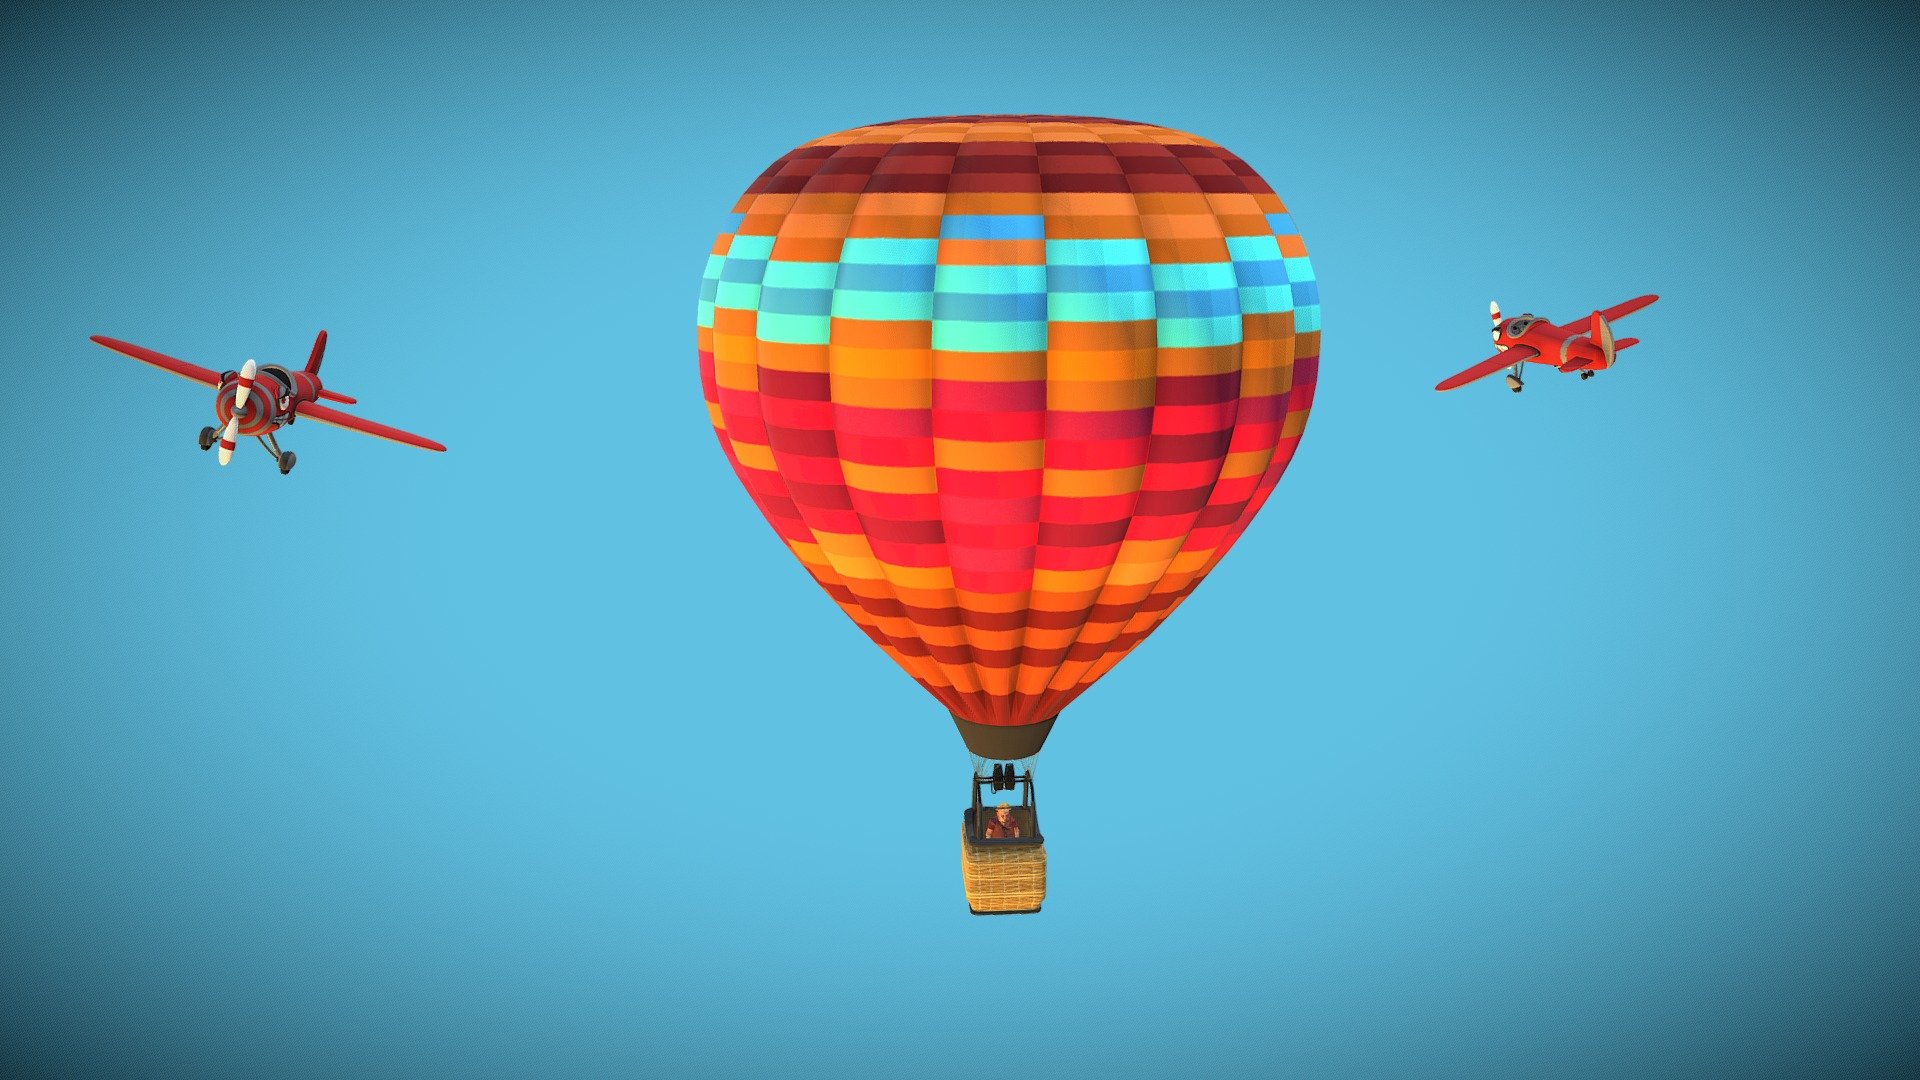 Two Animated flying Airplanes Circling a Hot Air Balloon in this Looped animation. Look for the animated man waving from the basket 3d model